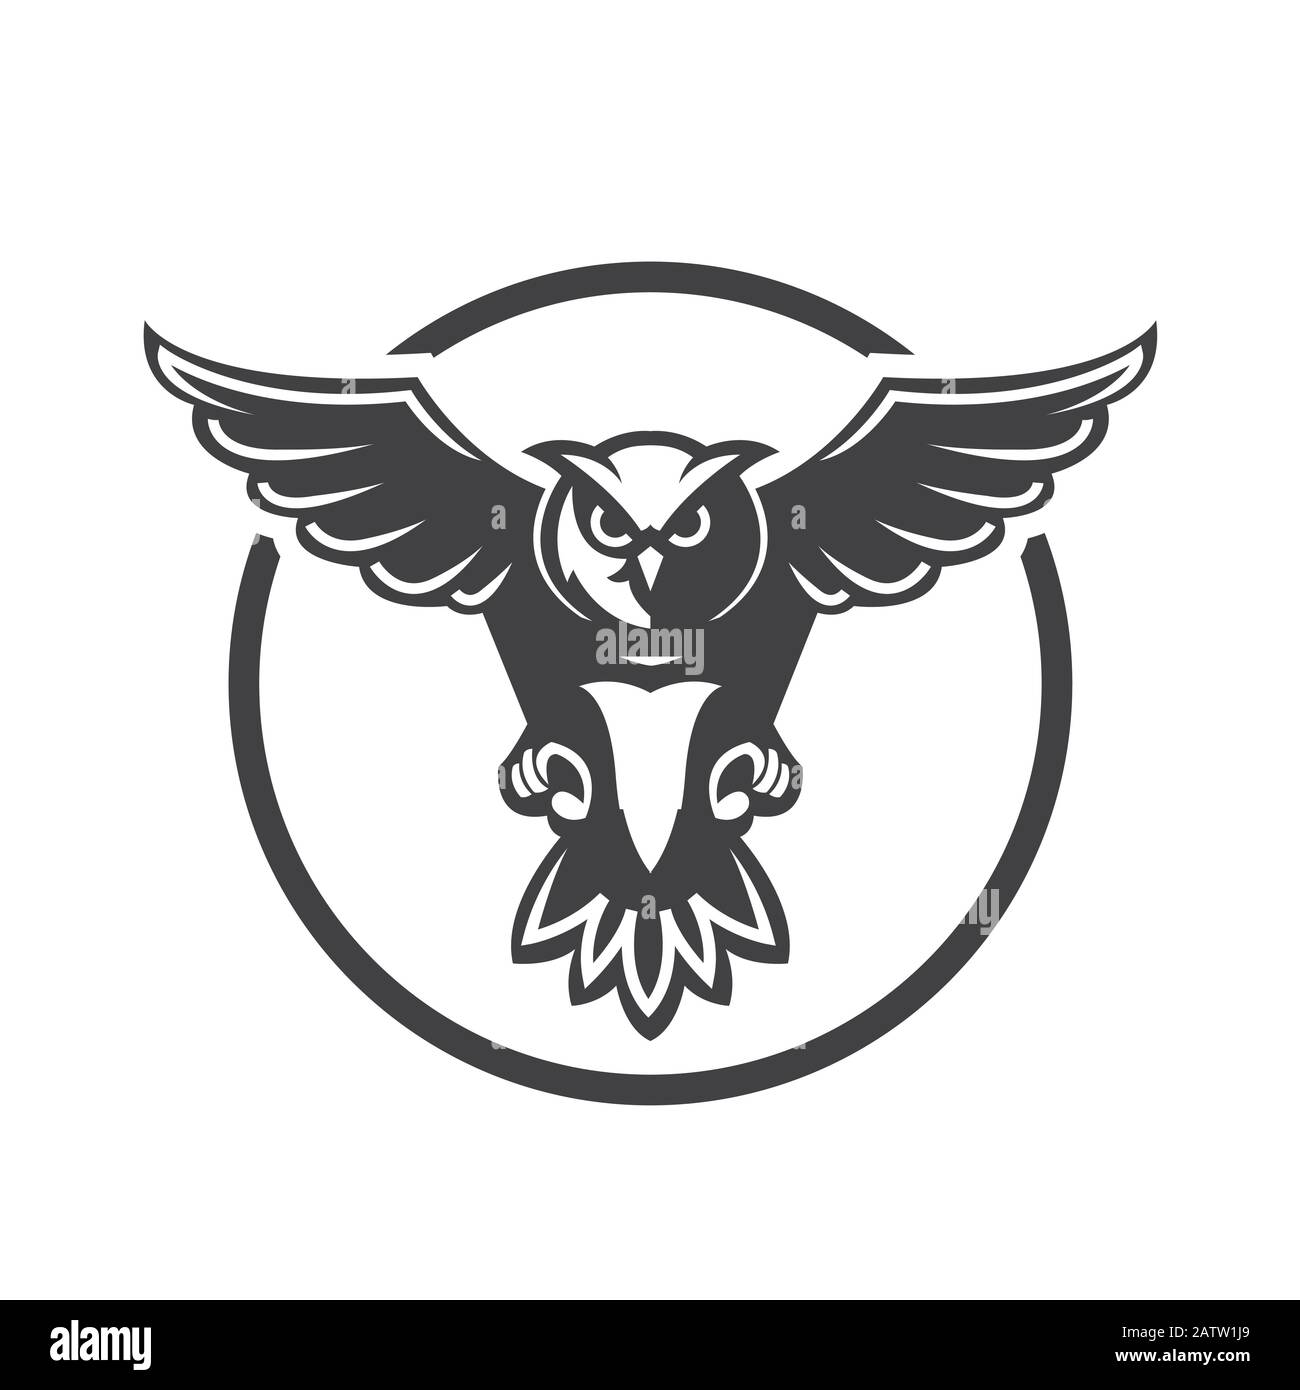 Owl icon vector in modern flat style for web, graphic and mobile design Stock Vector